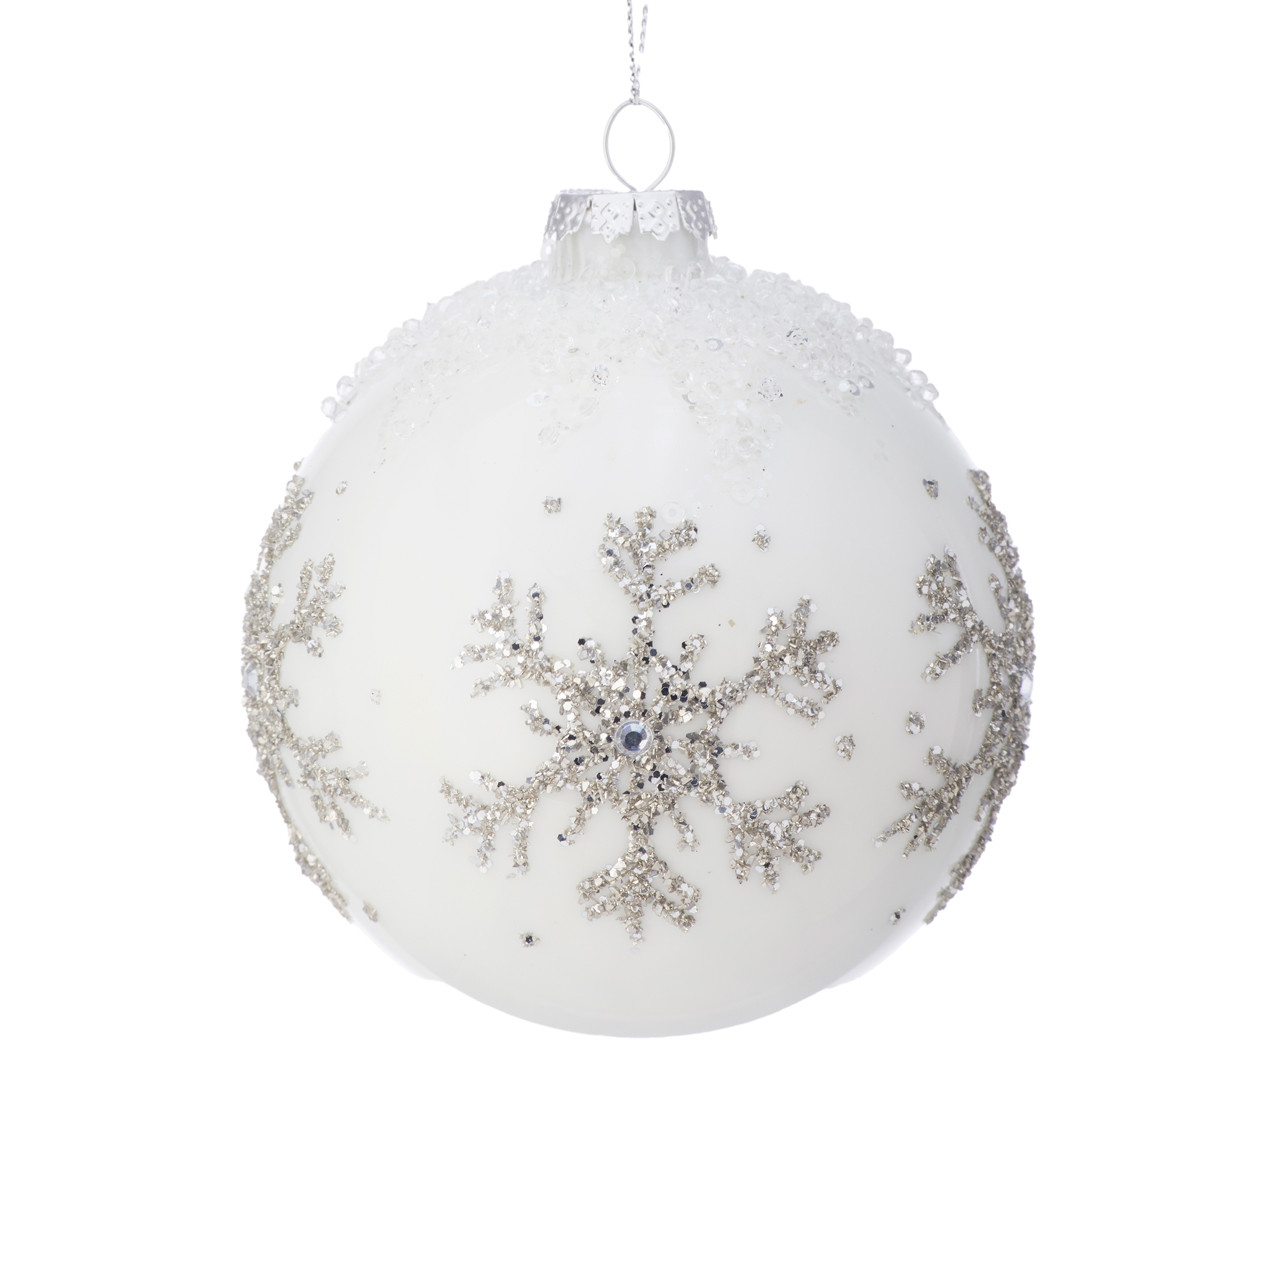 4 in. White and Silver Pearlized Snowflake Ball Ornament 